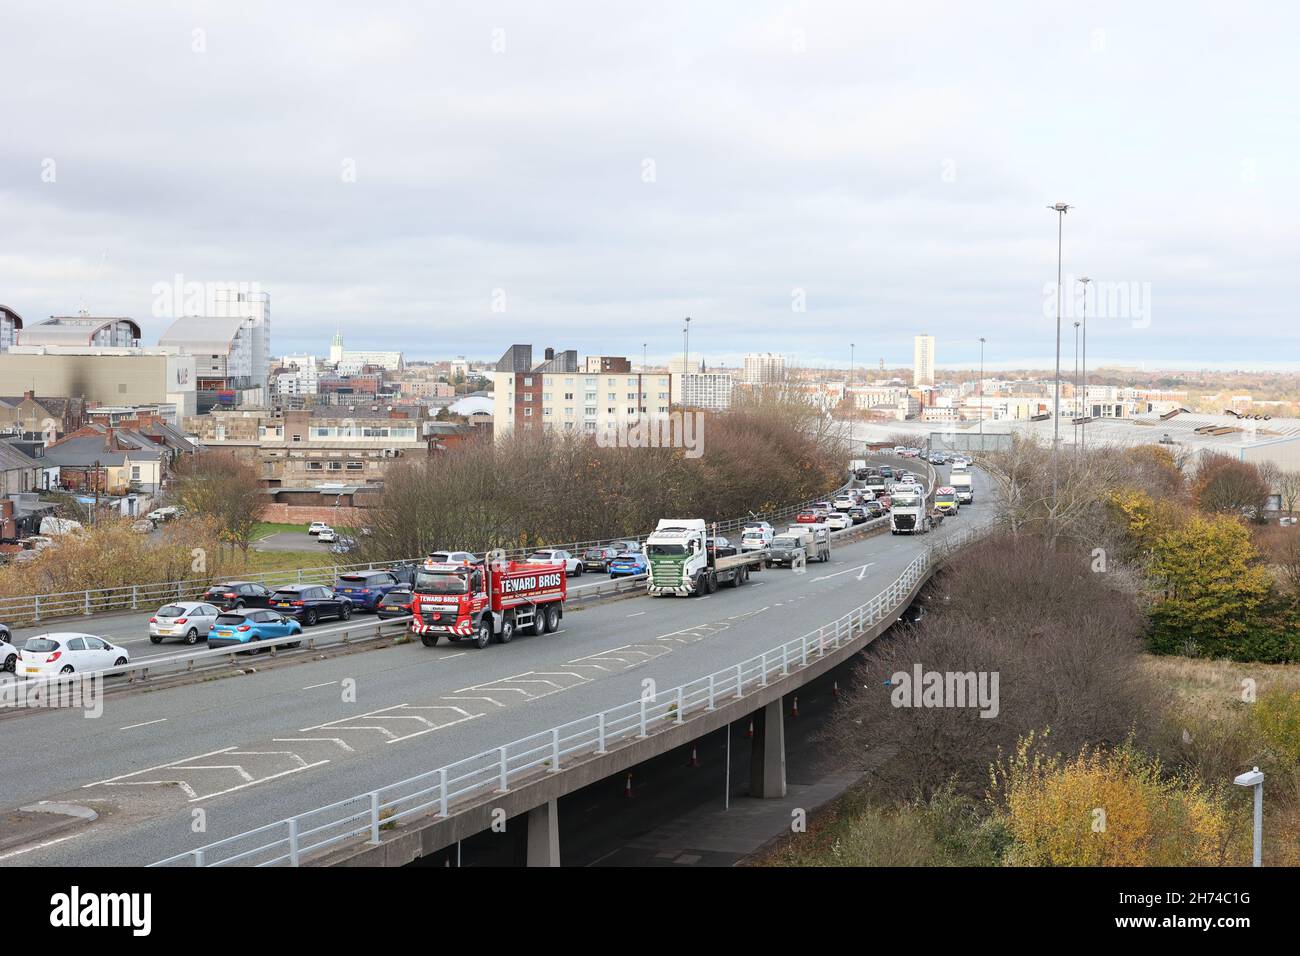 Gateshead UK: 20th Nov 2021: Newcastle Gateshead truckers protesting fuel prices in a go-slow drive through city centre with Police escort. View from highrise tower block Stock Photo